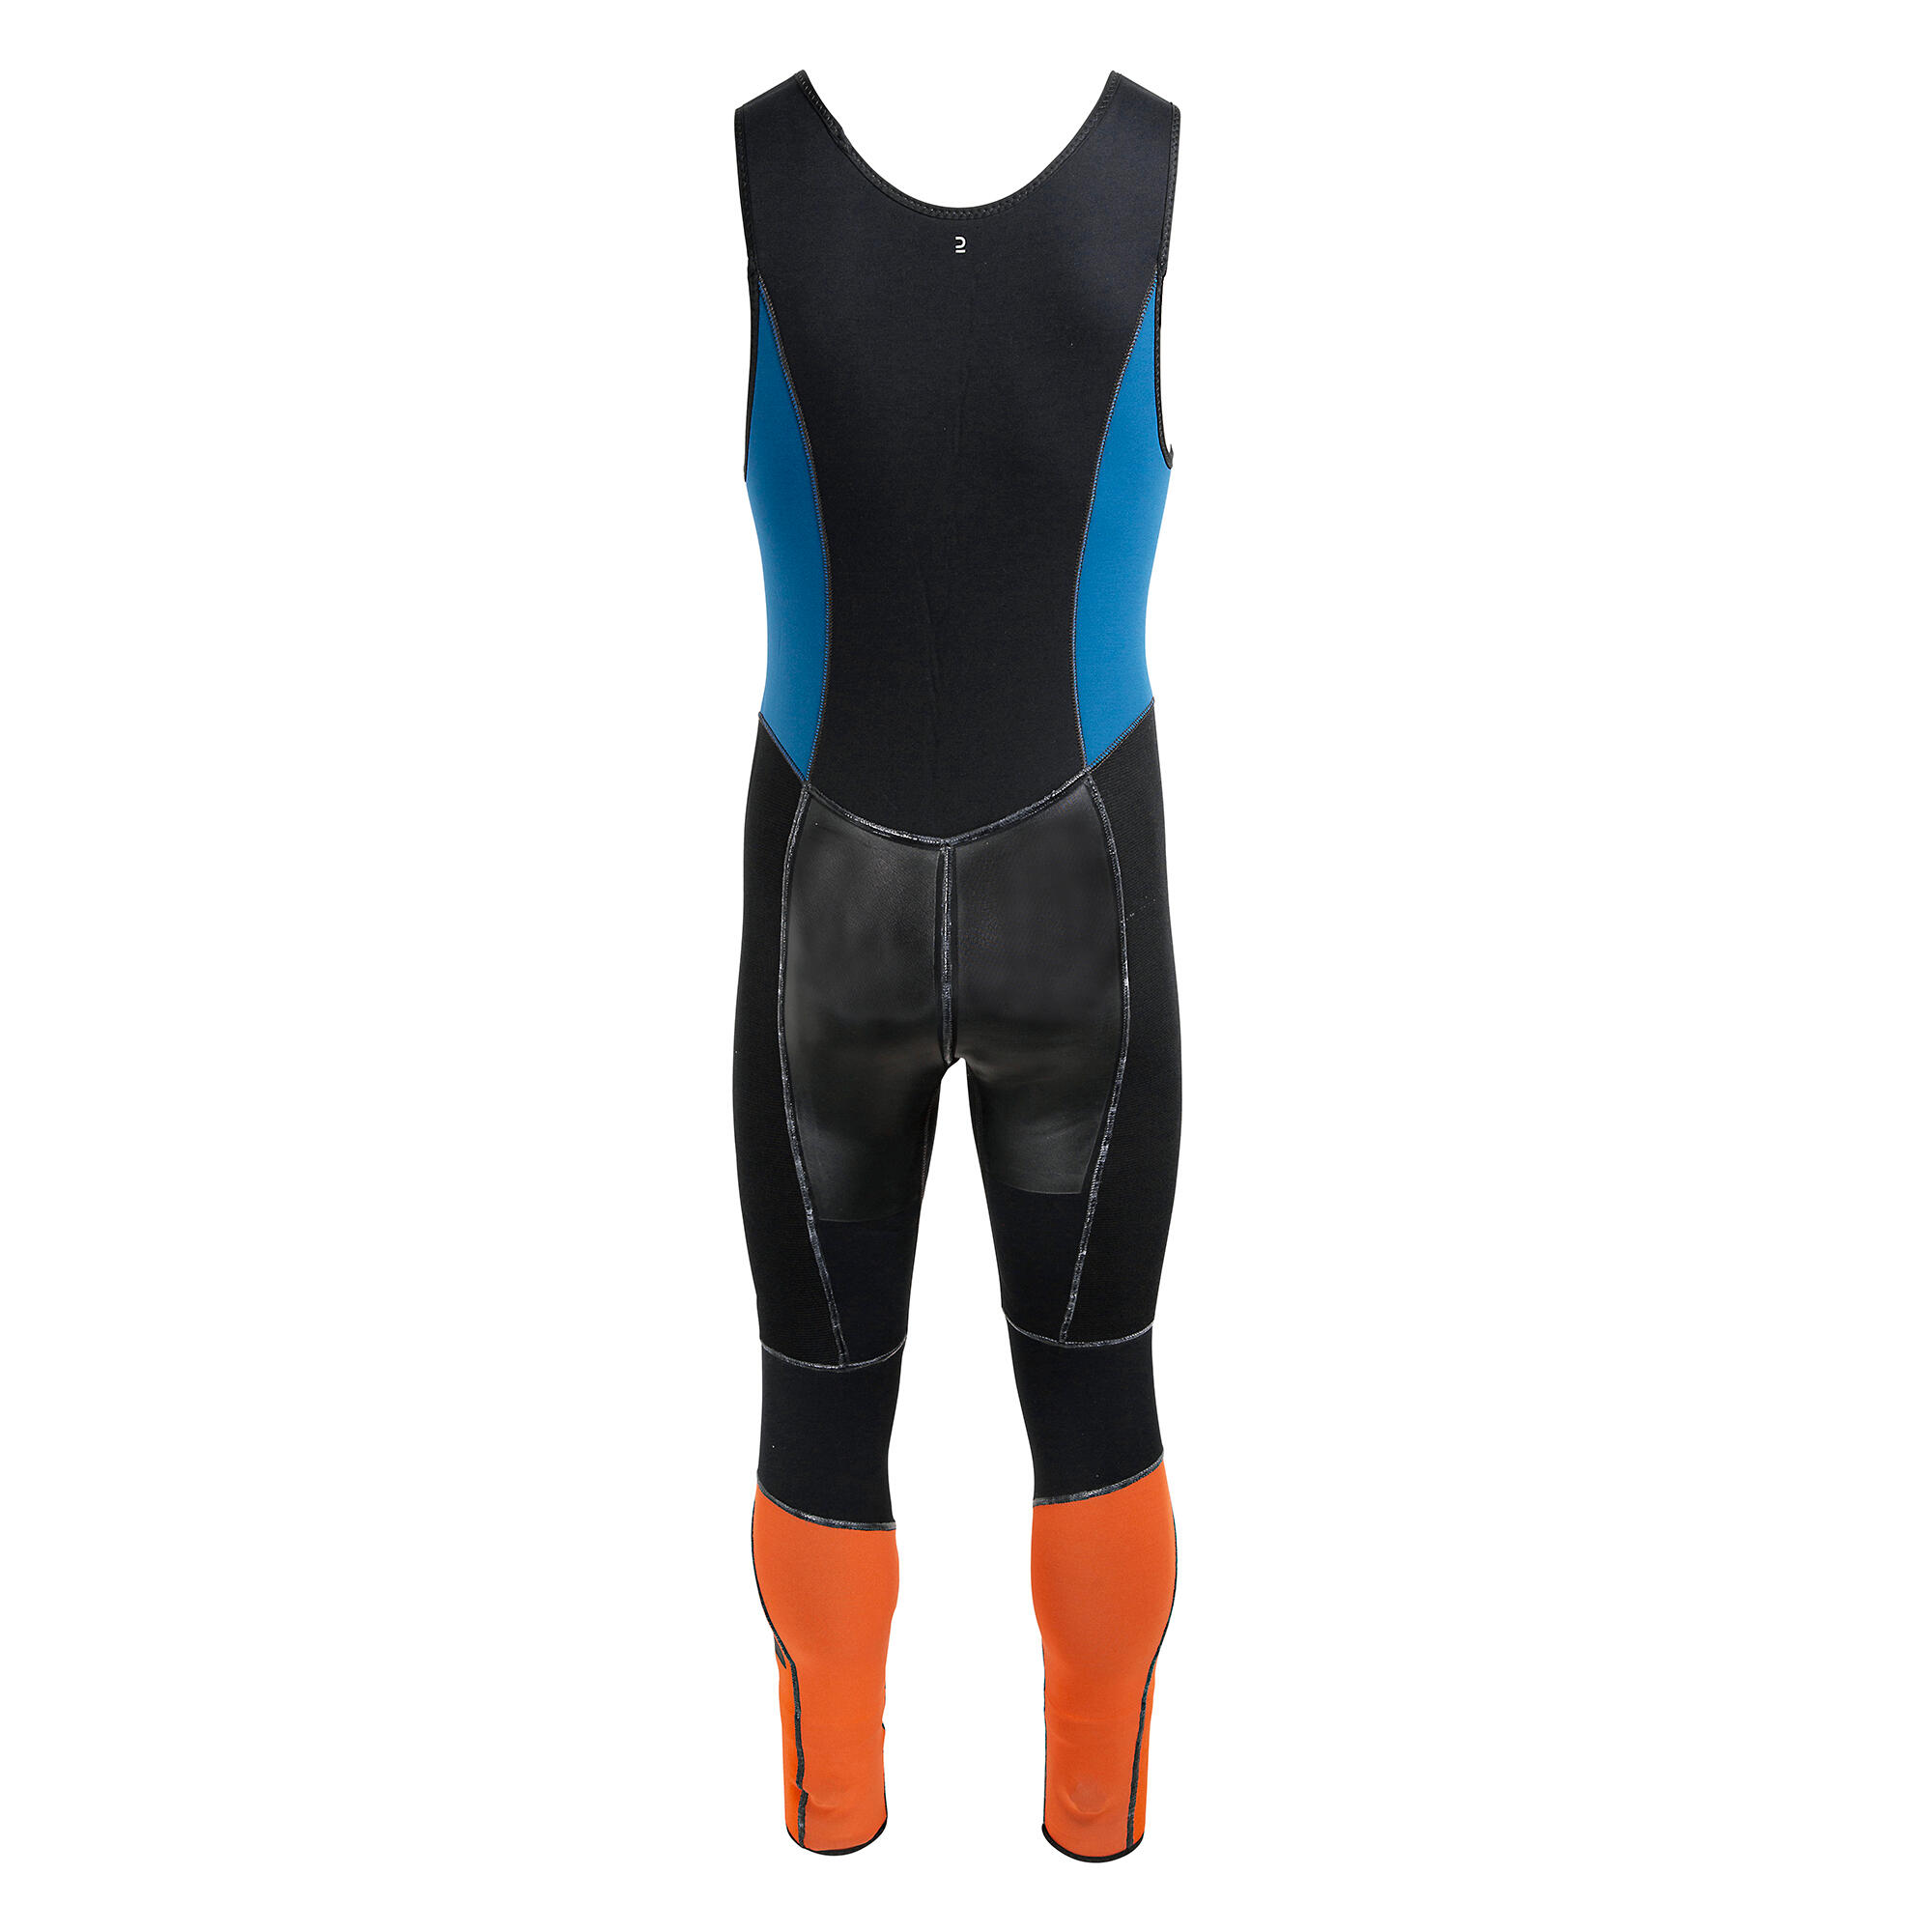 Men's Canyoning Wetsuit Trousers 5 mm - MK 500 7/19